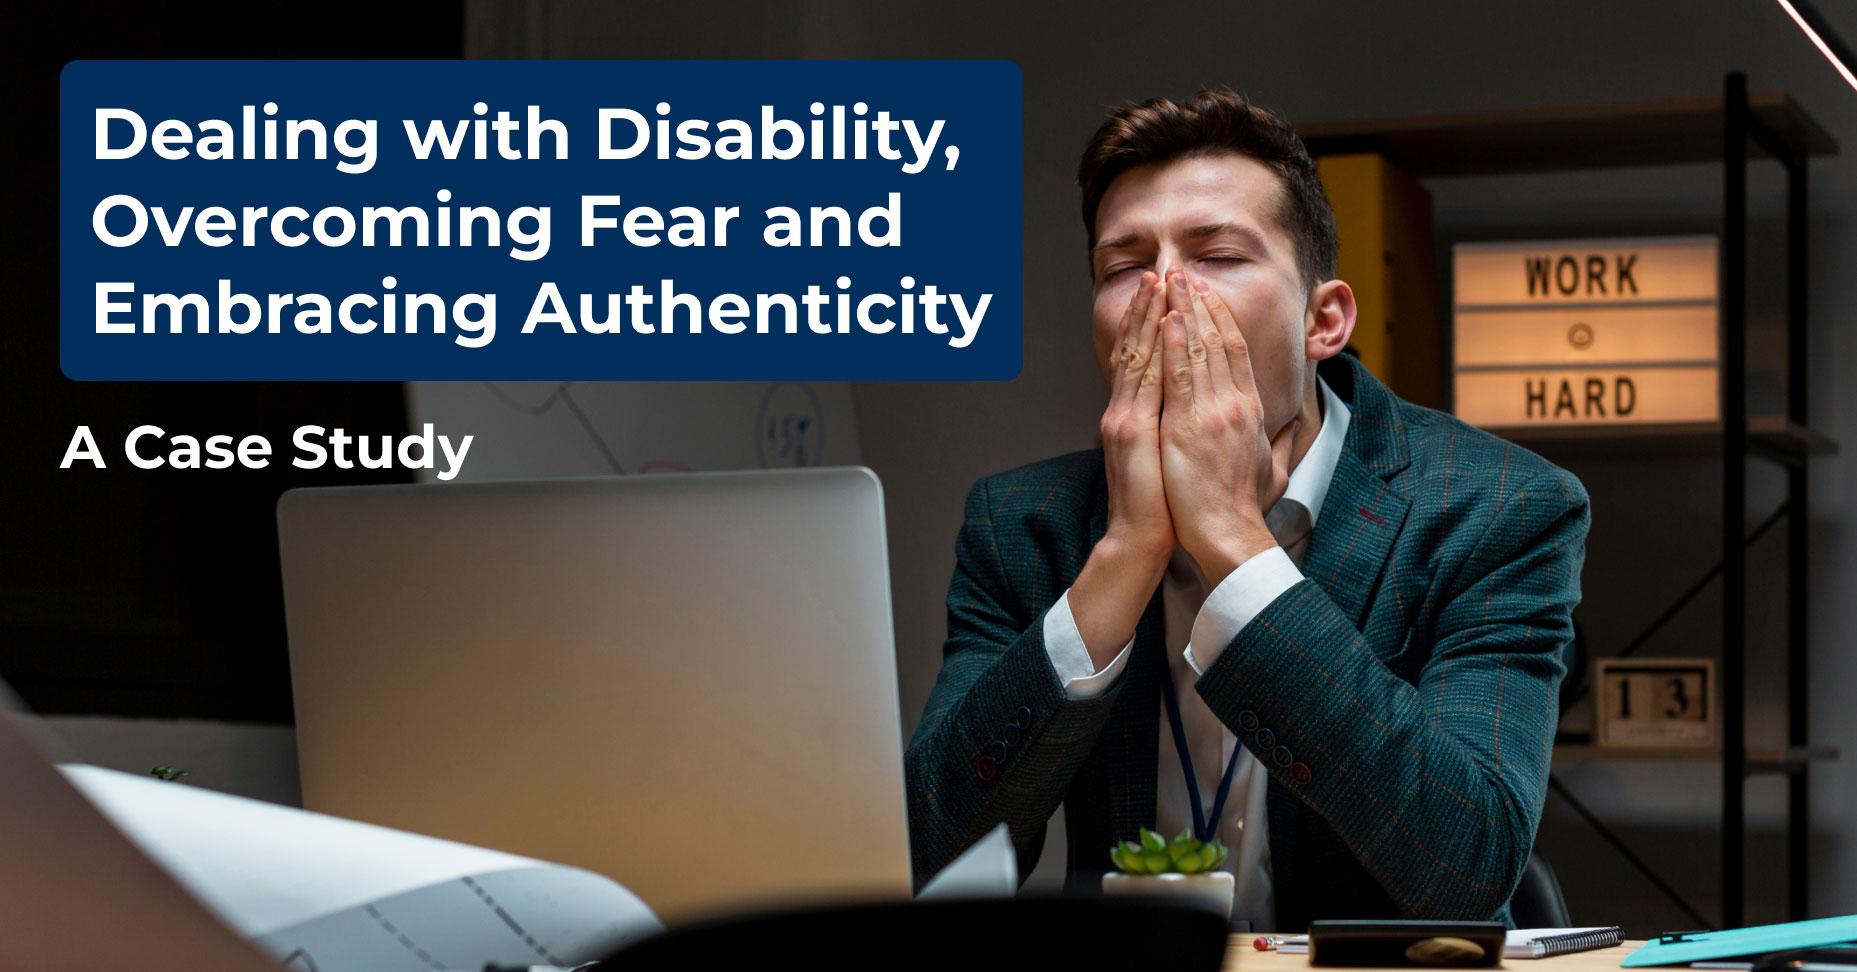 Dealing with Disability, Overcoming Fear and Embracing Authenticity: A Case Study